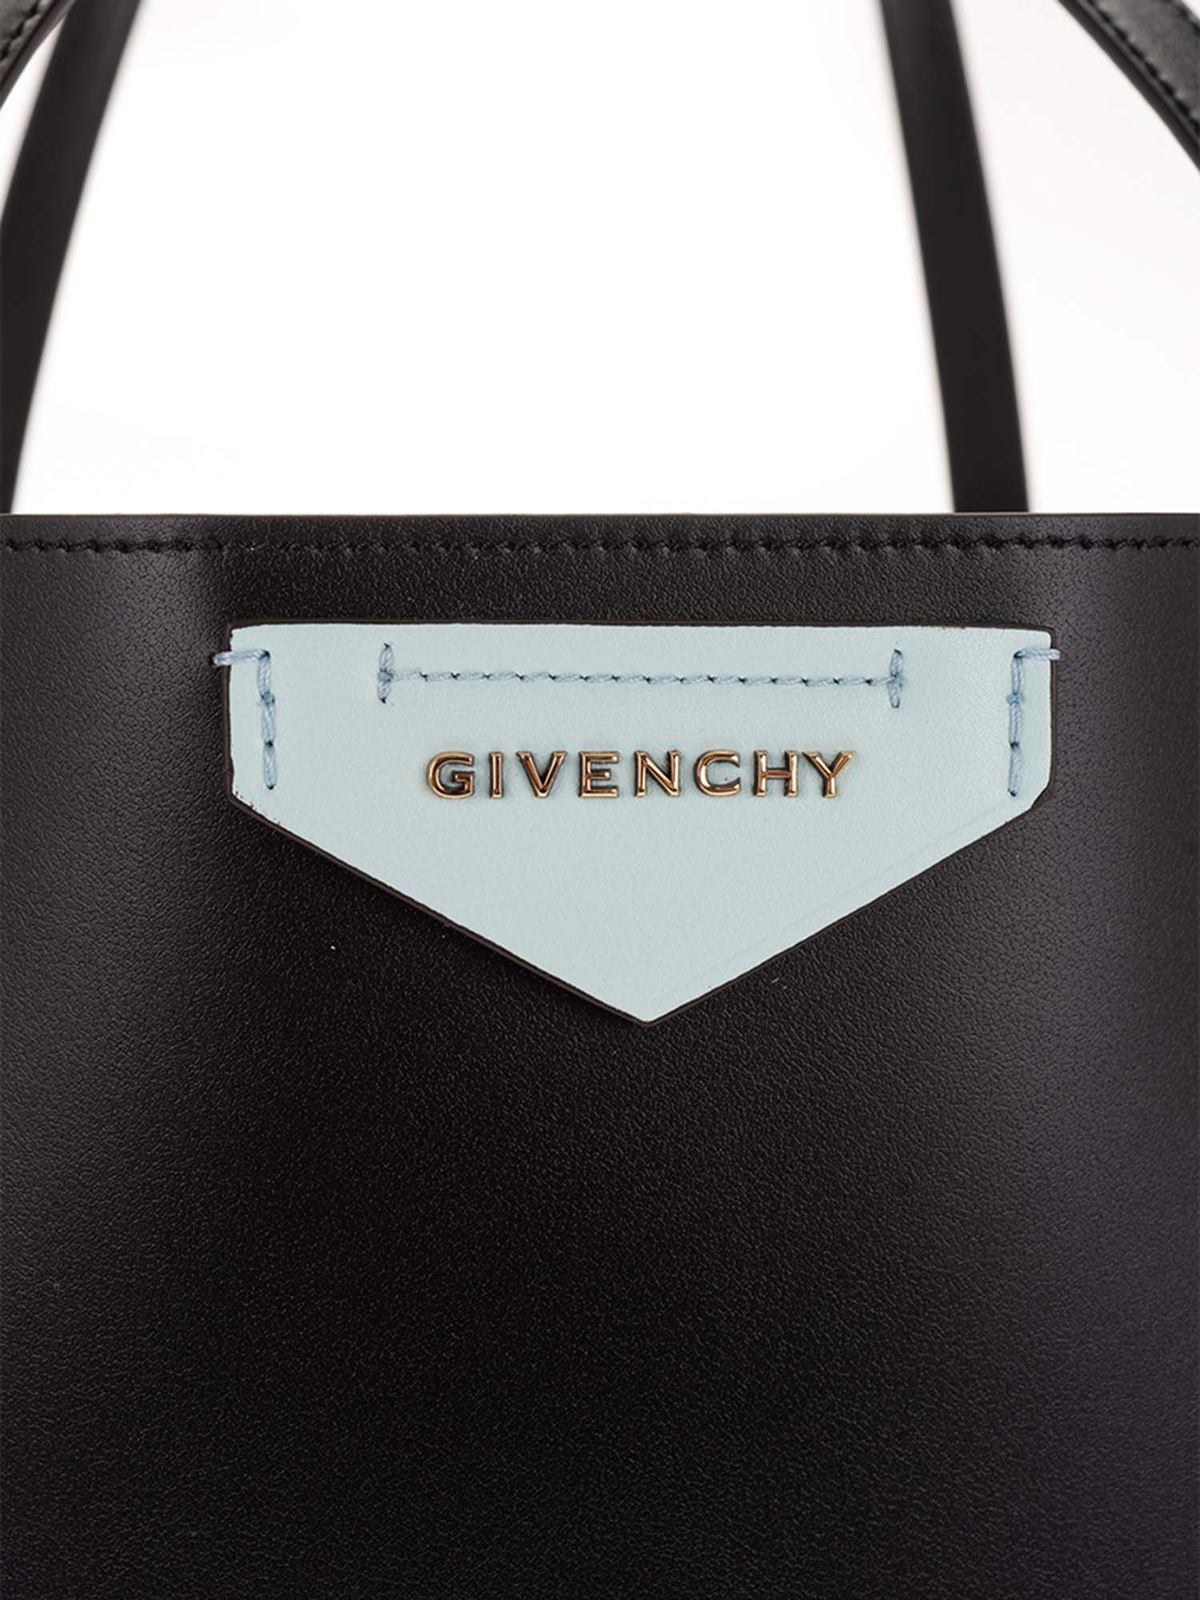 Attent Normaal gesproken cilinder Totes bags Givenchy - Neon logo-print tote bag in black - BB50GDB10J001